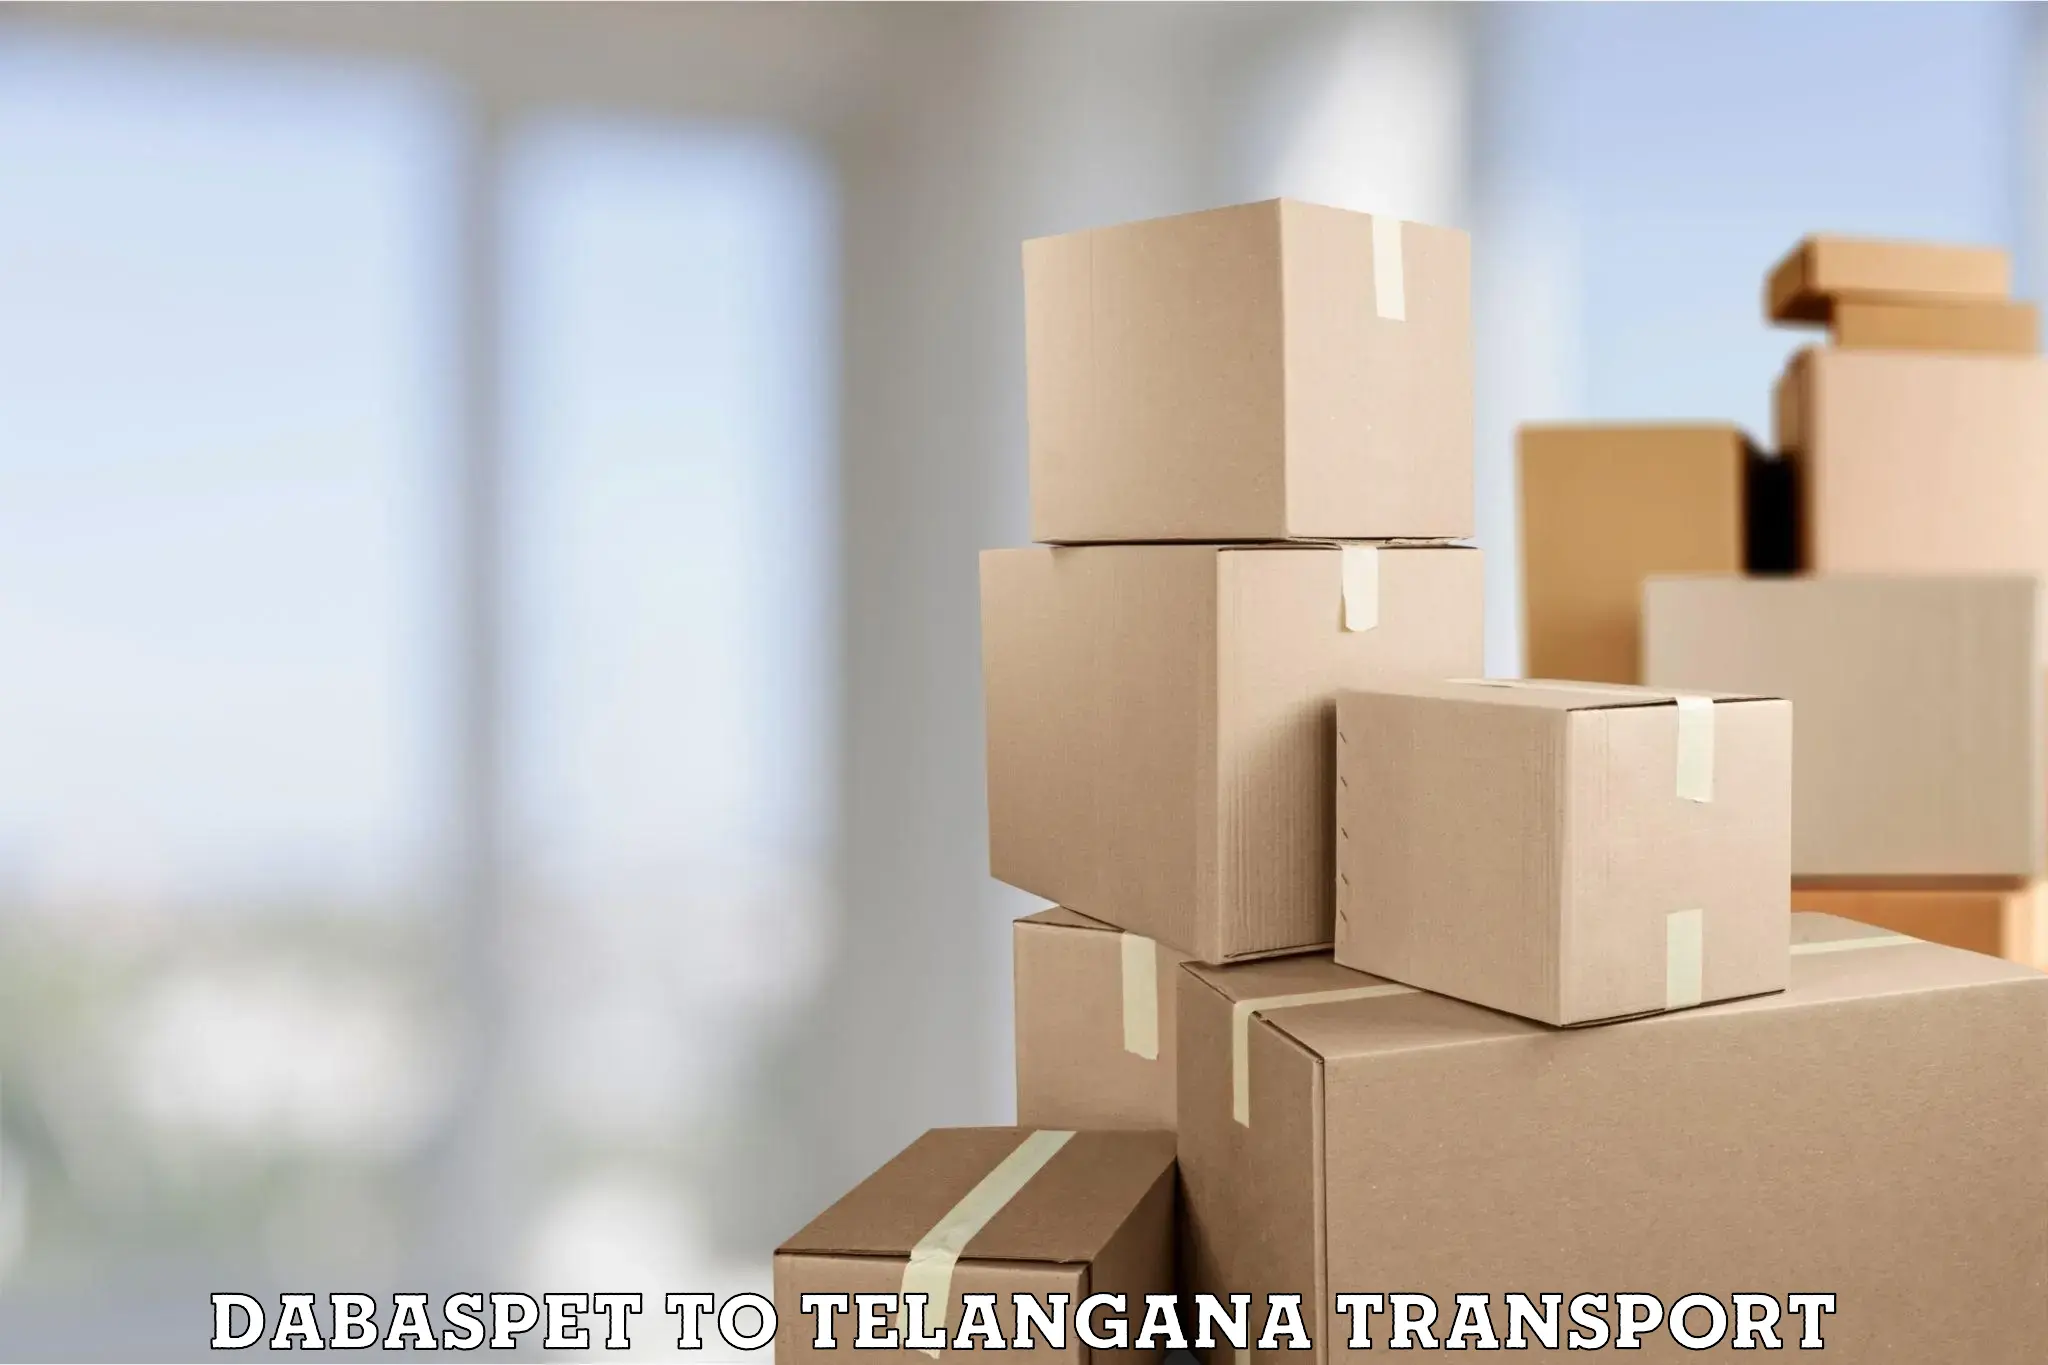 Delivery service Dabaspet to Telangana